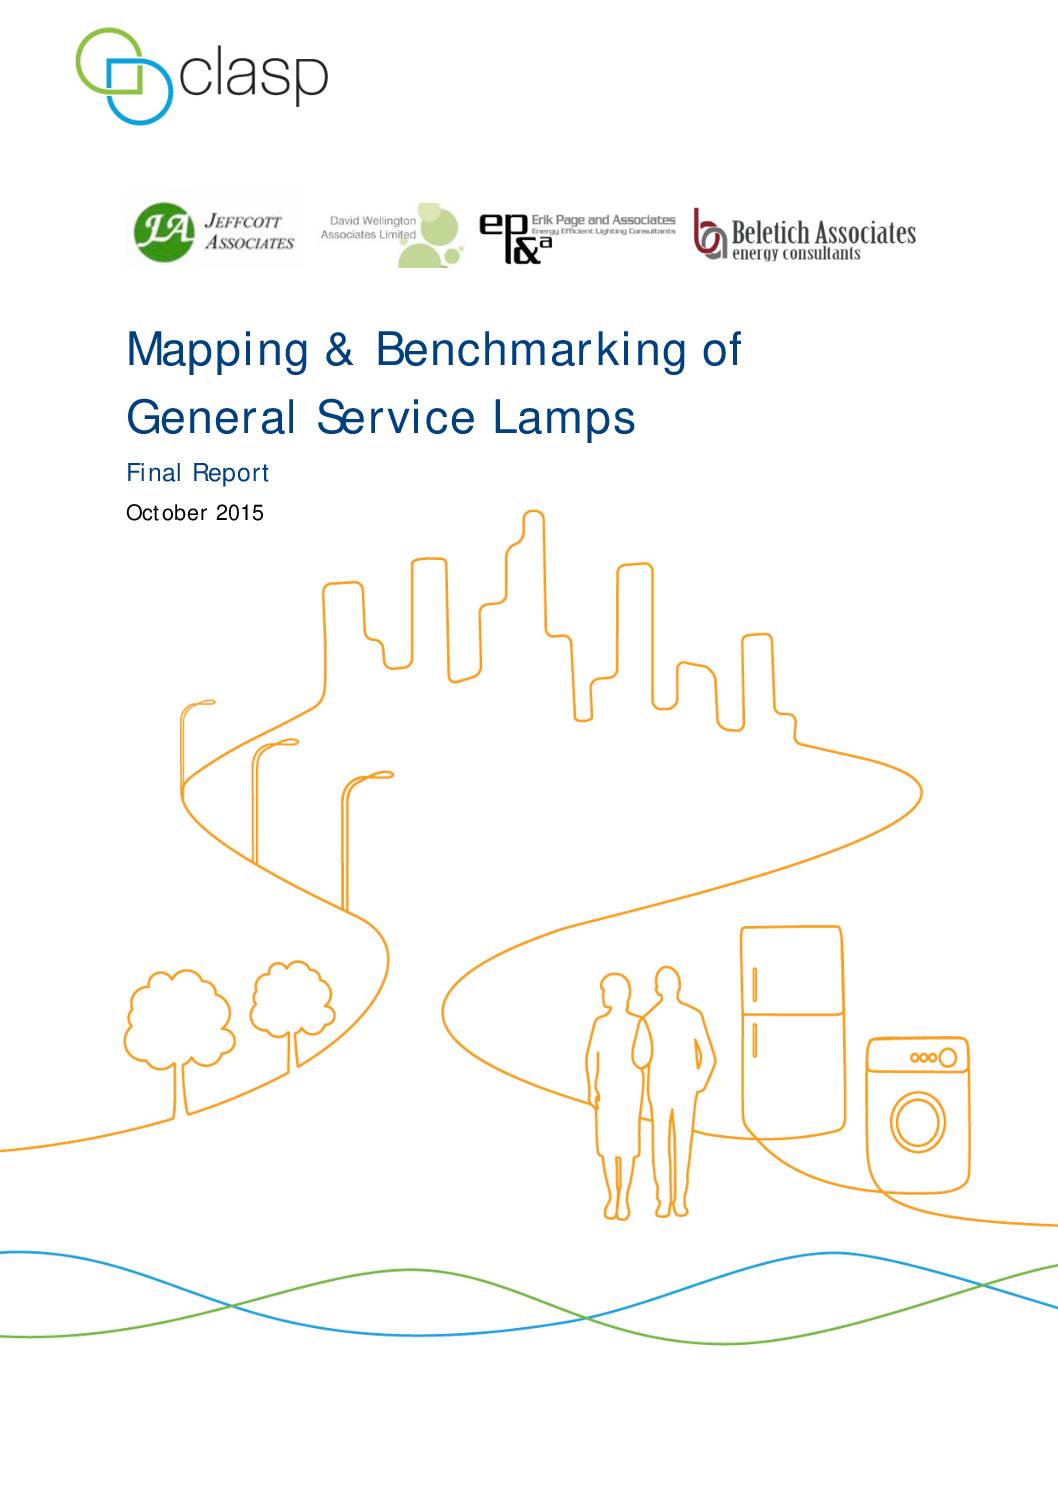 Mapping & Benchmarking of General Service Lamps